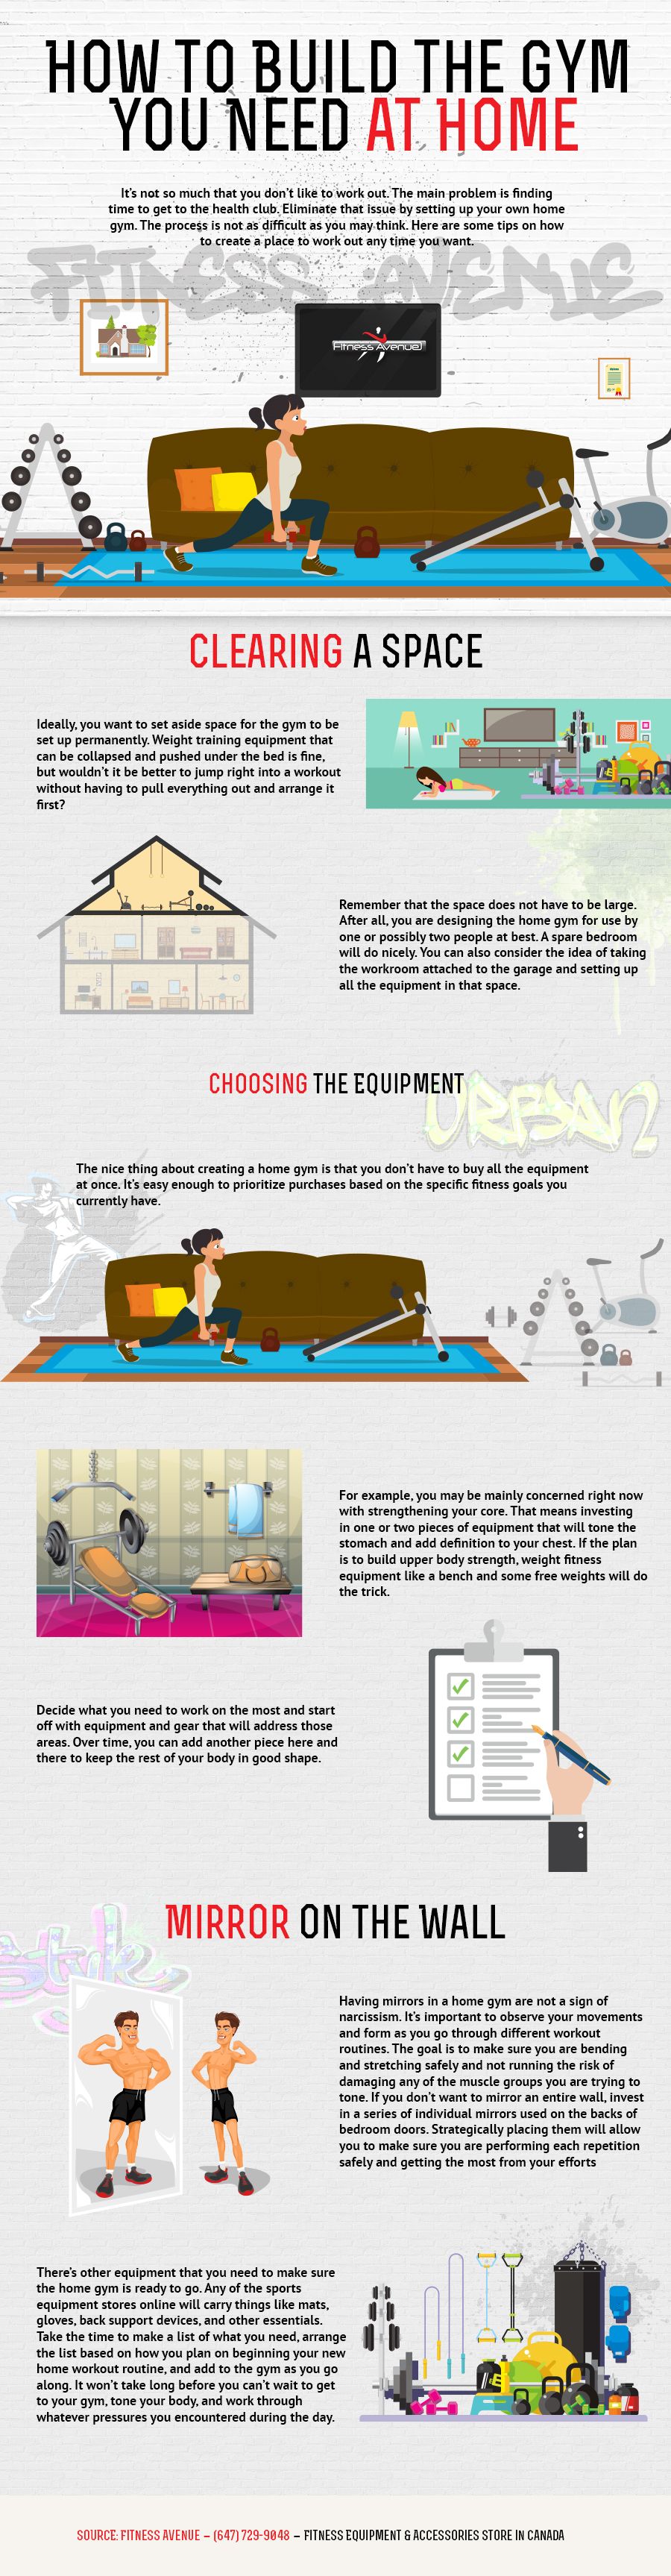 How to Build the Gym you Need at Home [Infographic]